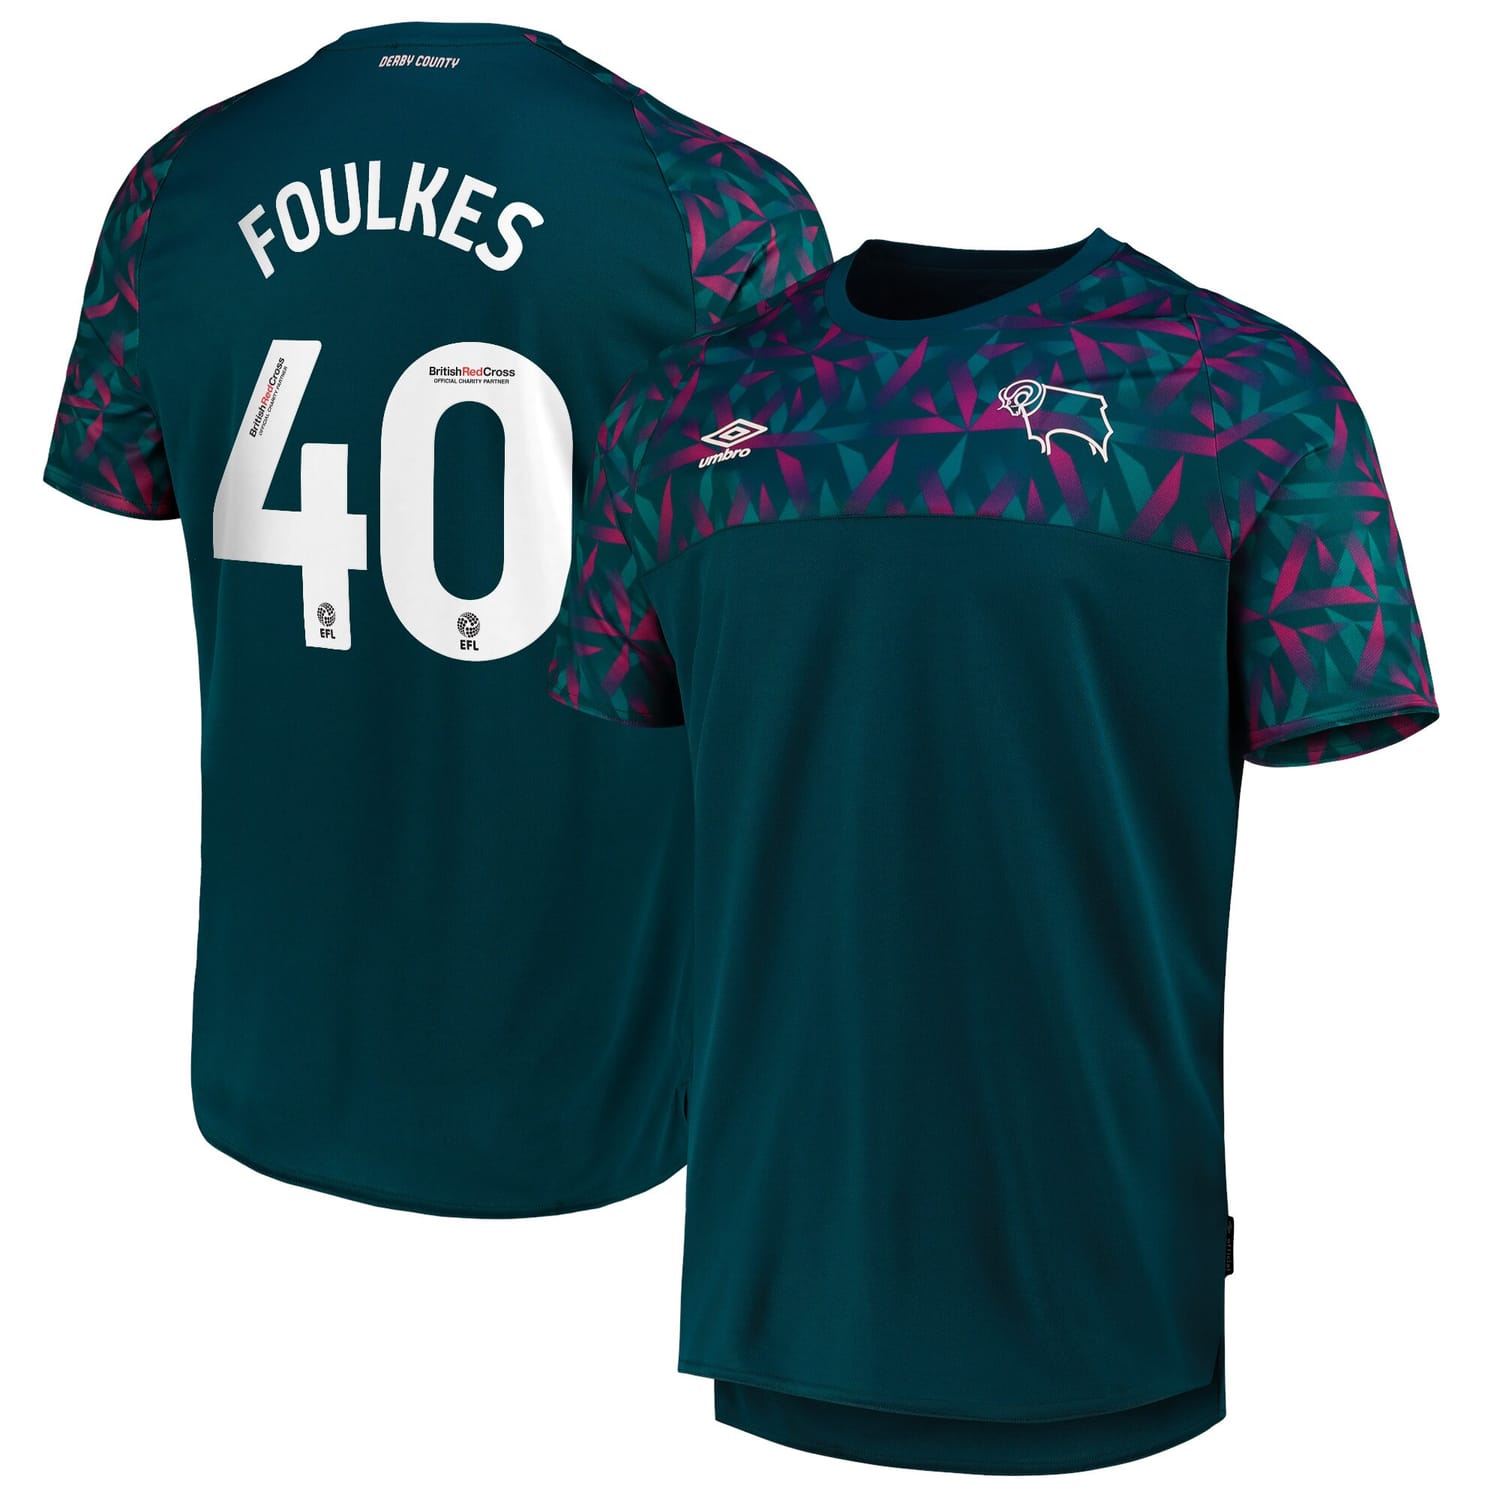 EFL League One Derby County Home Goalkeeper Jersey Shirt 2022-23 player Harrison Foulkes 40 printing for Men